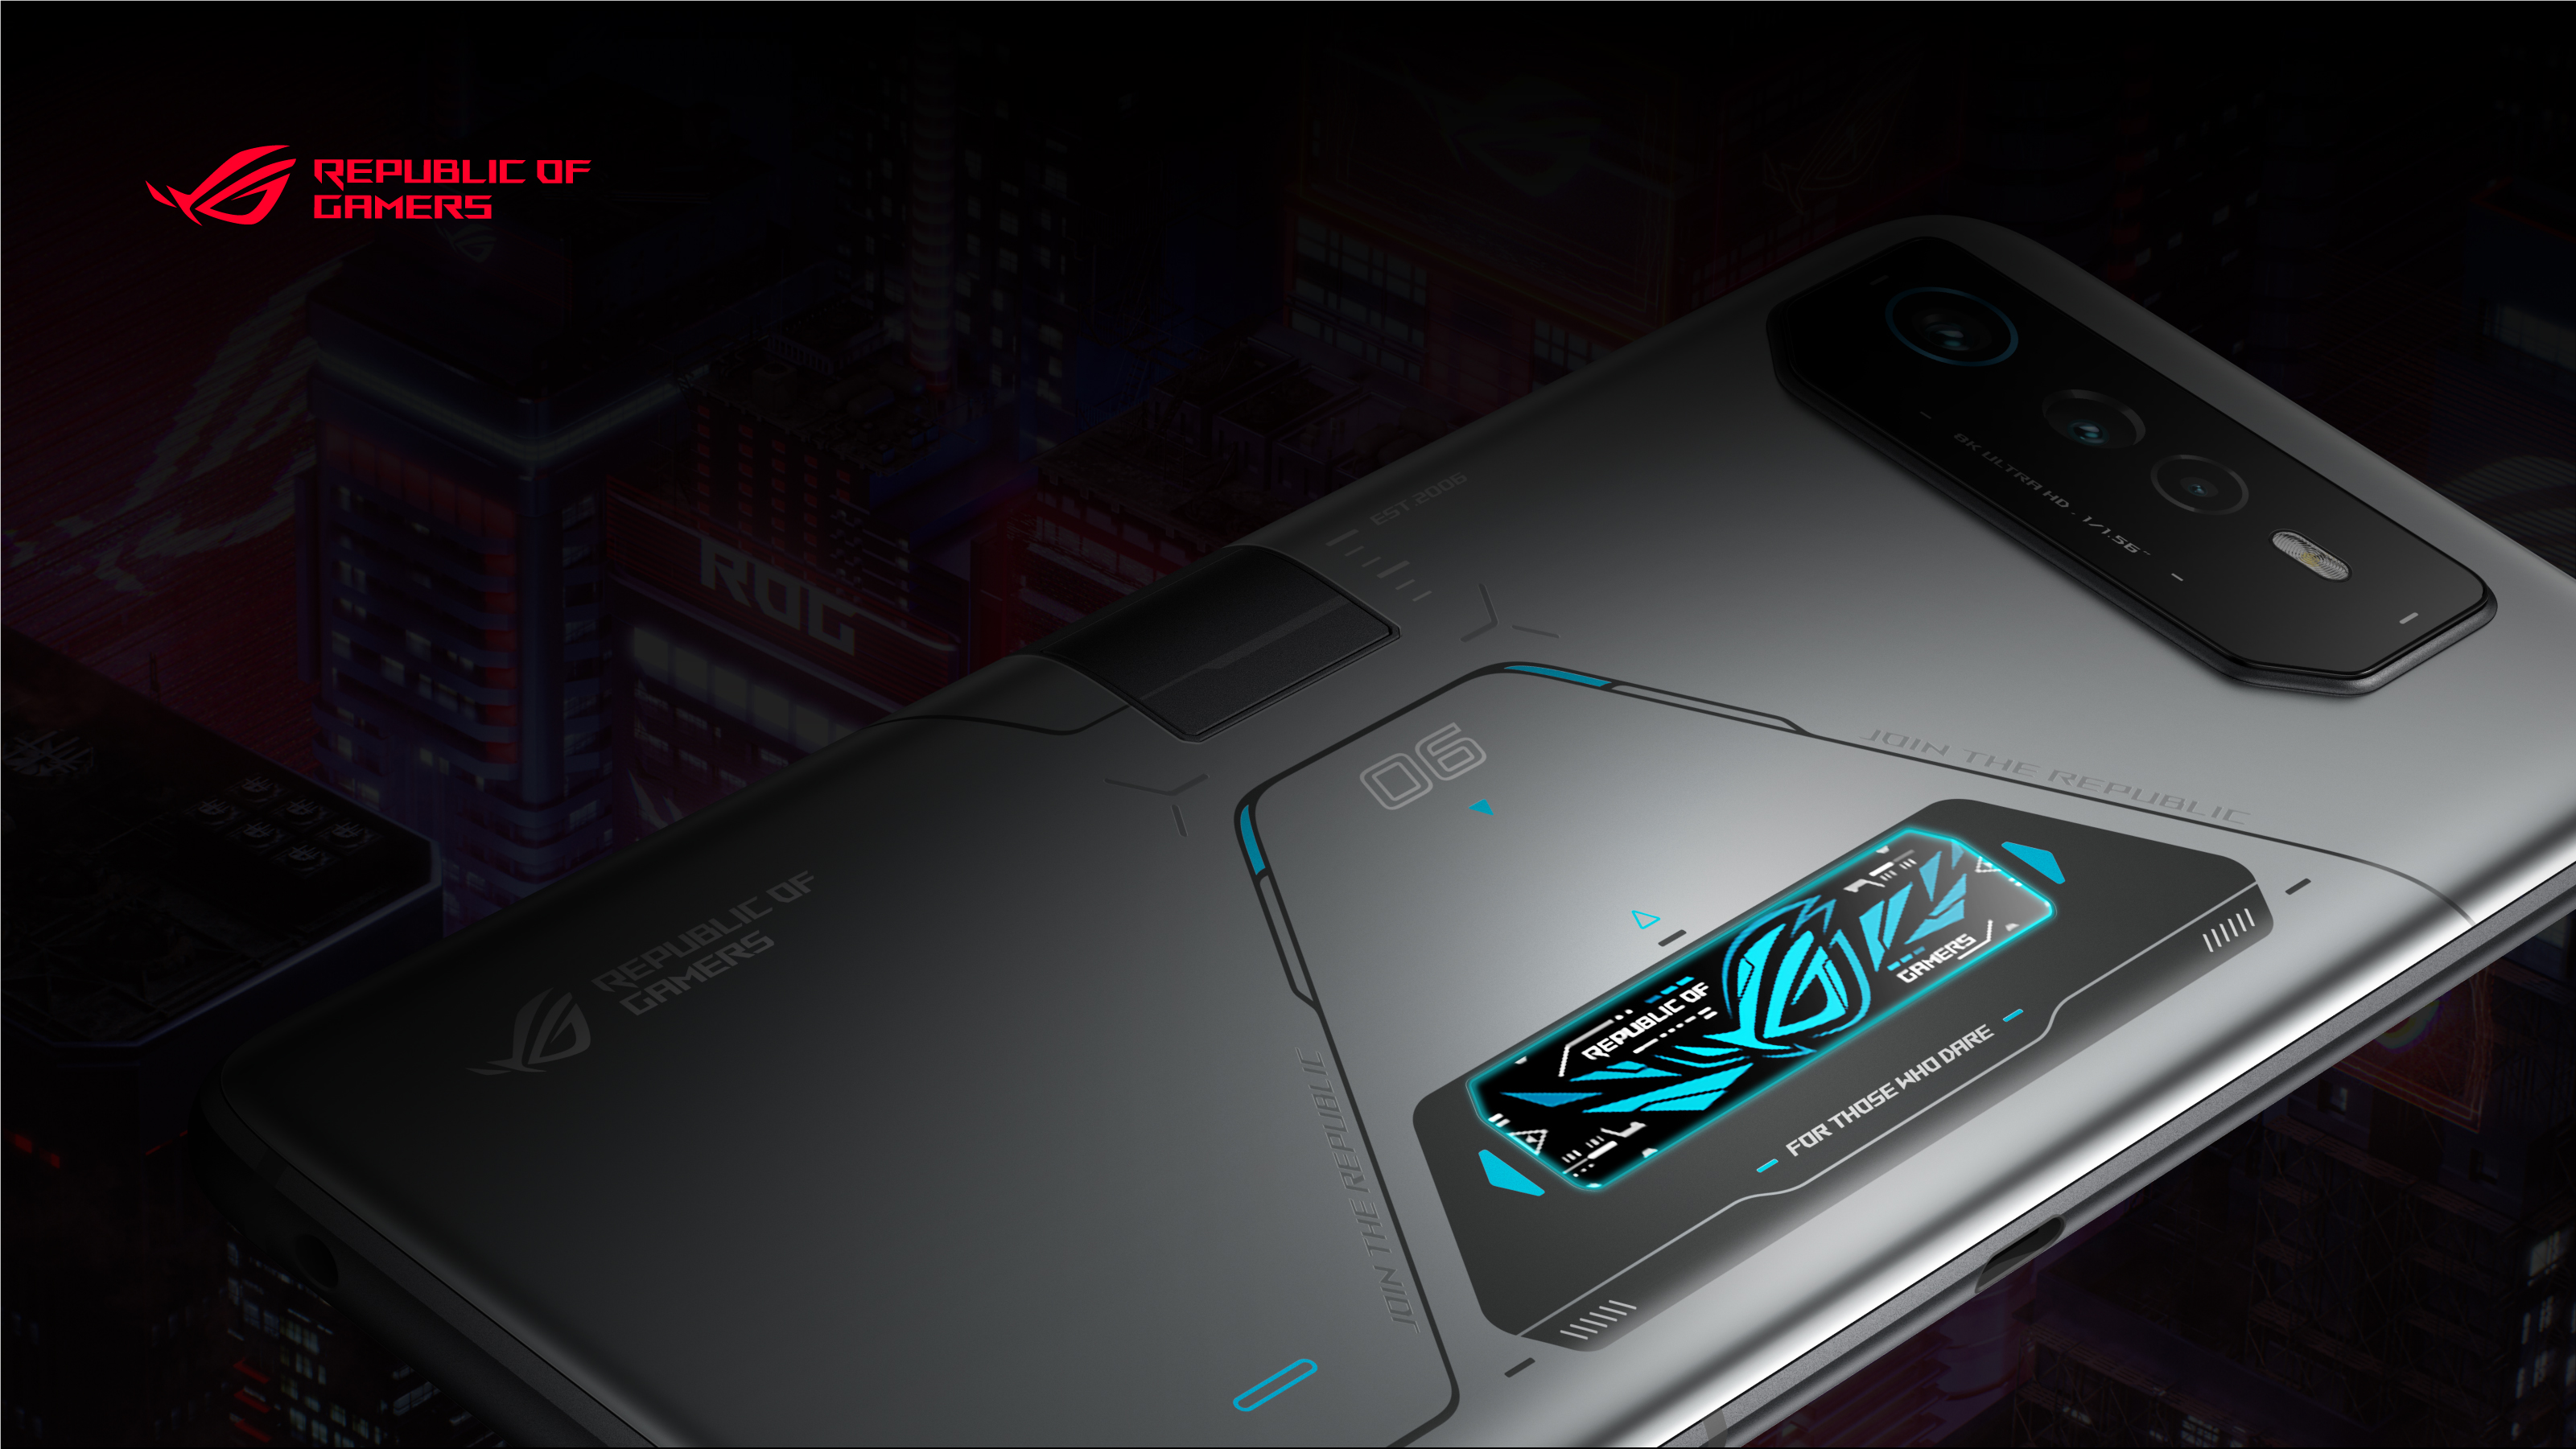 ROG Vision: A Second Display Represent Gamers